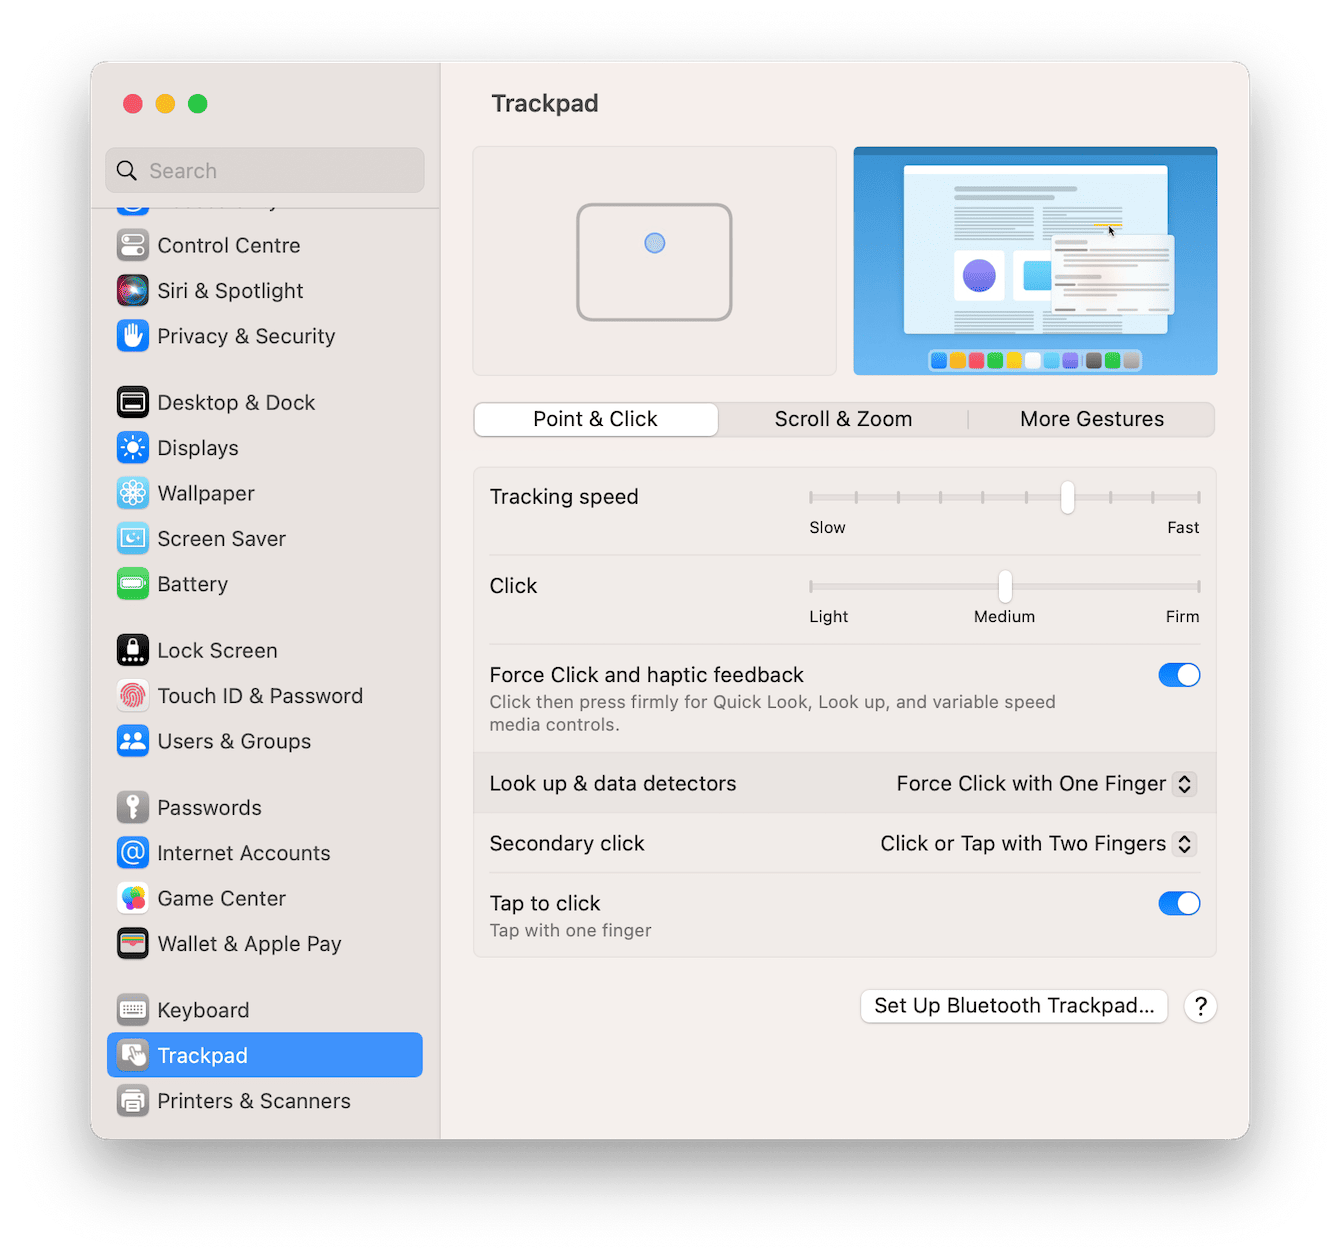 Trackpad and commands